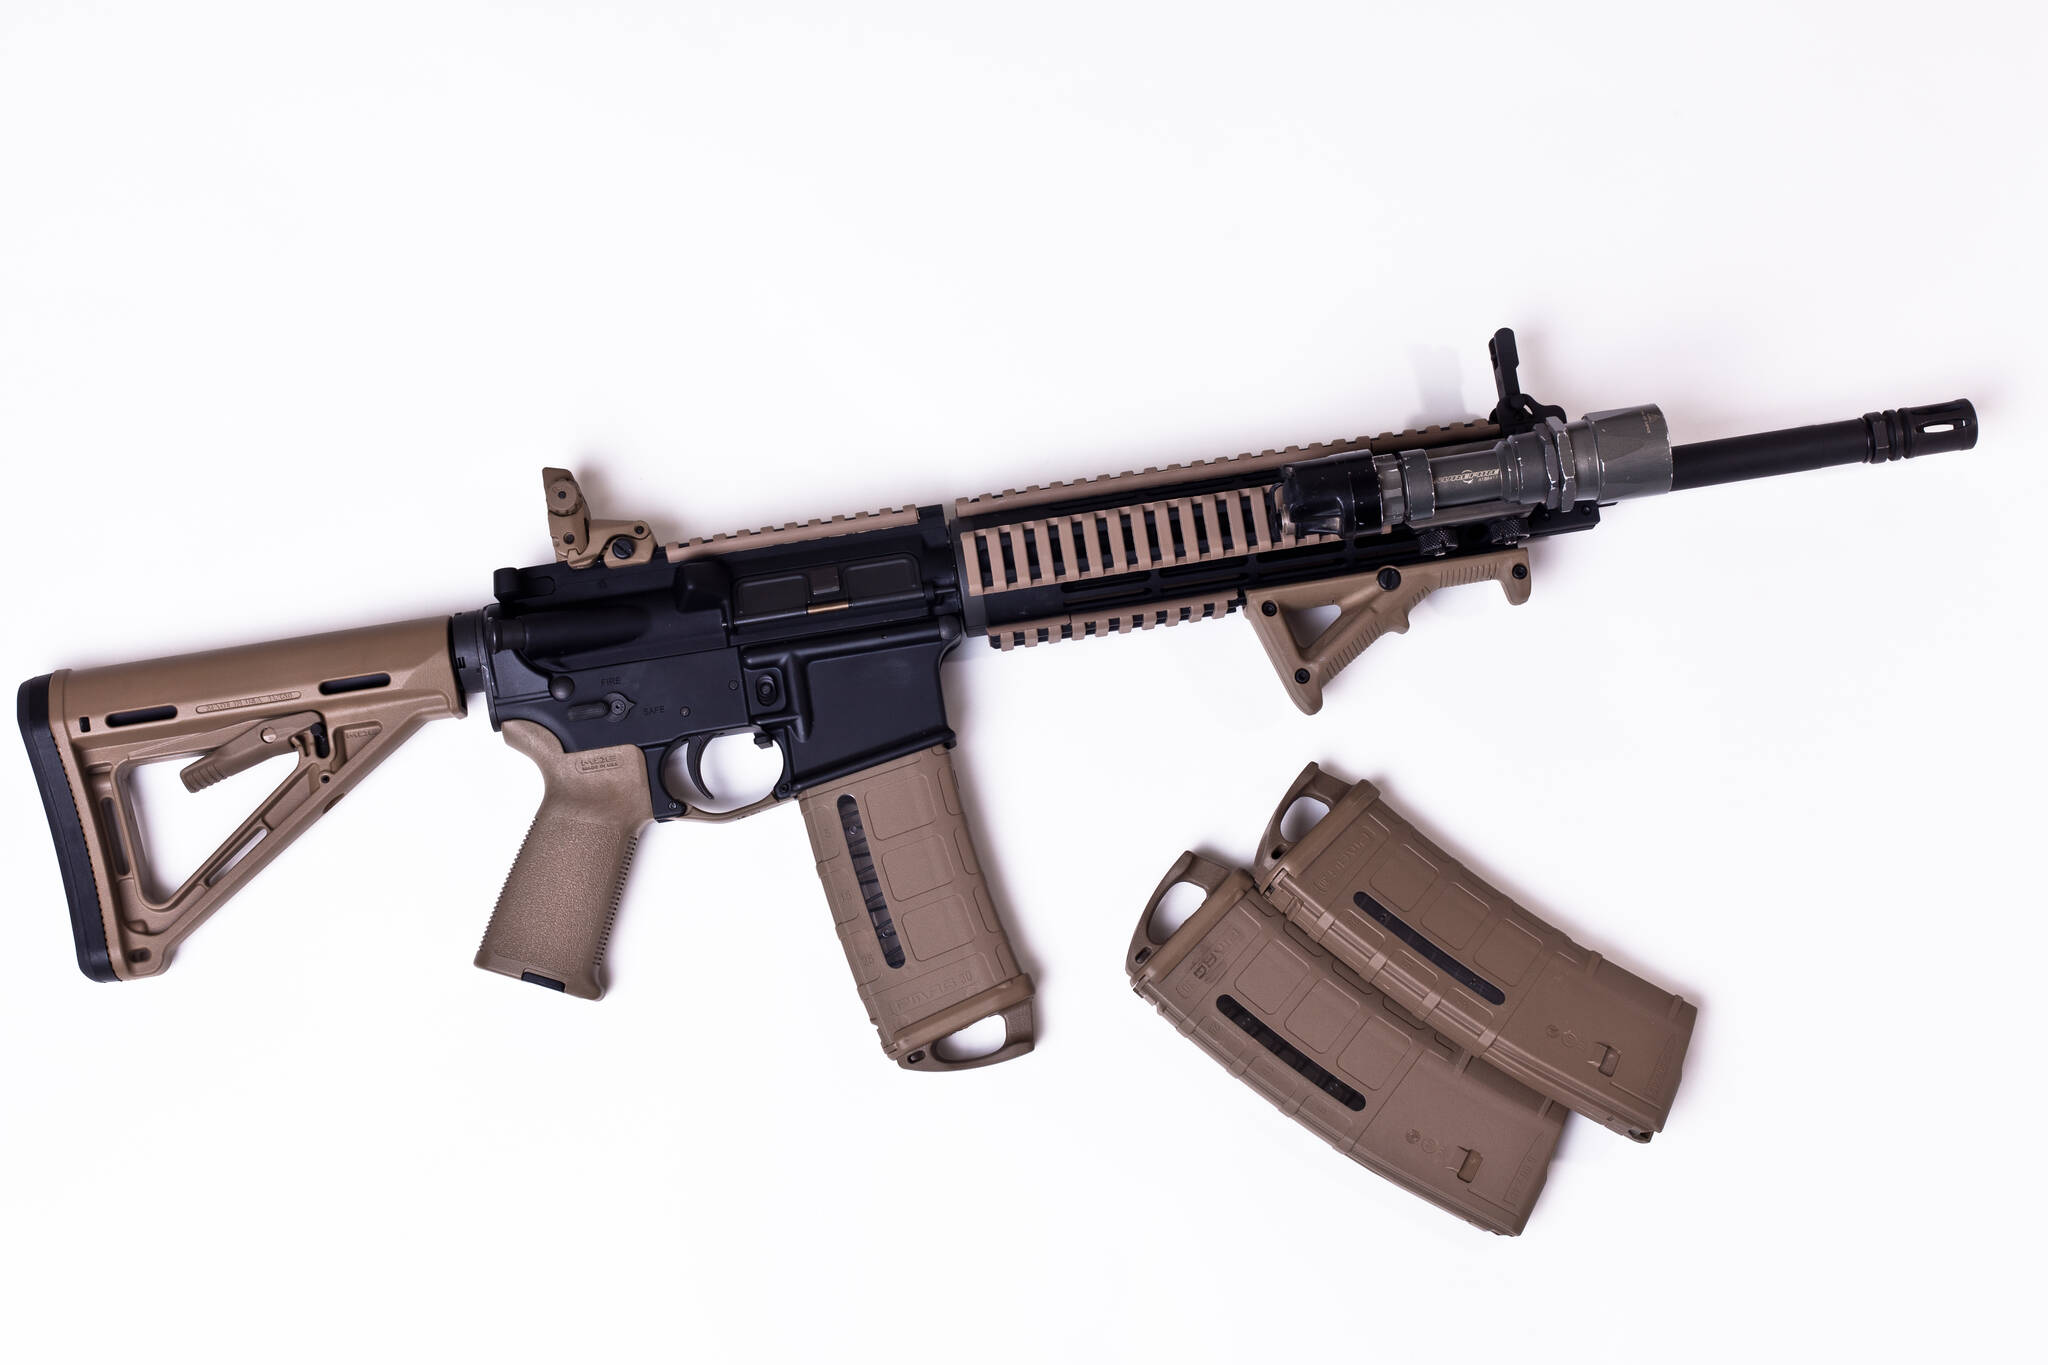 This image available under a Creative Commons license shows an AR-15 with magazines. (docmonstereyes / Flickr)